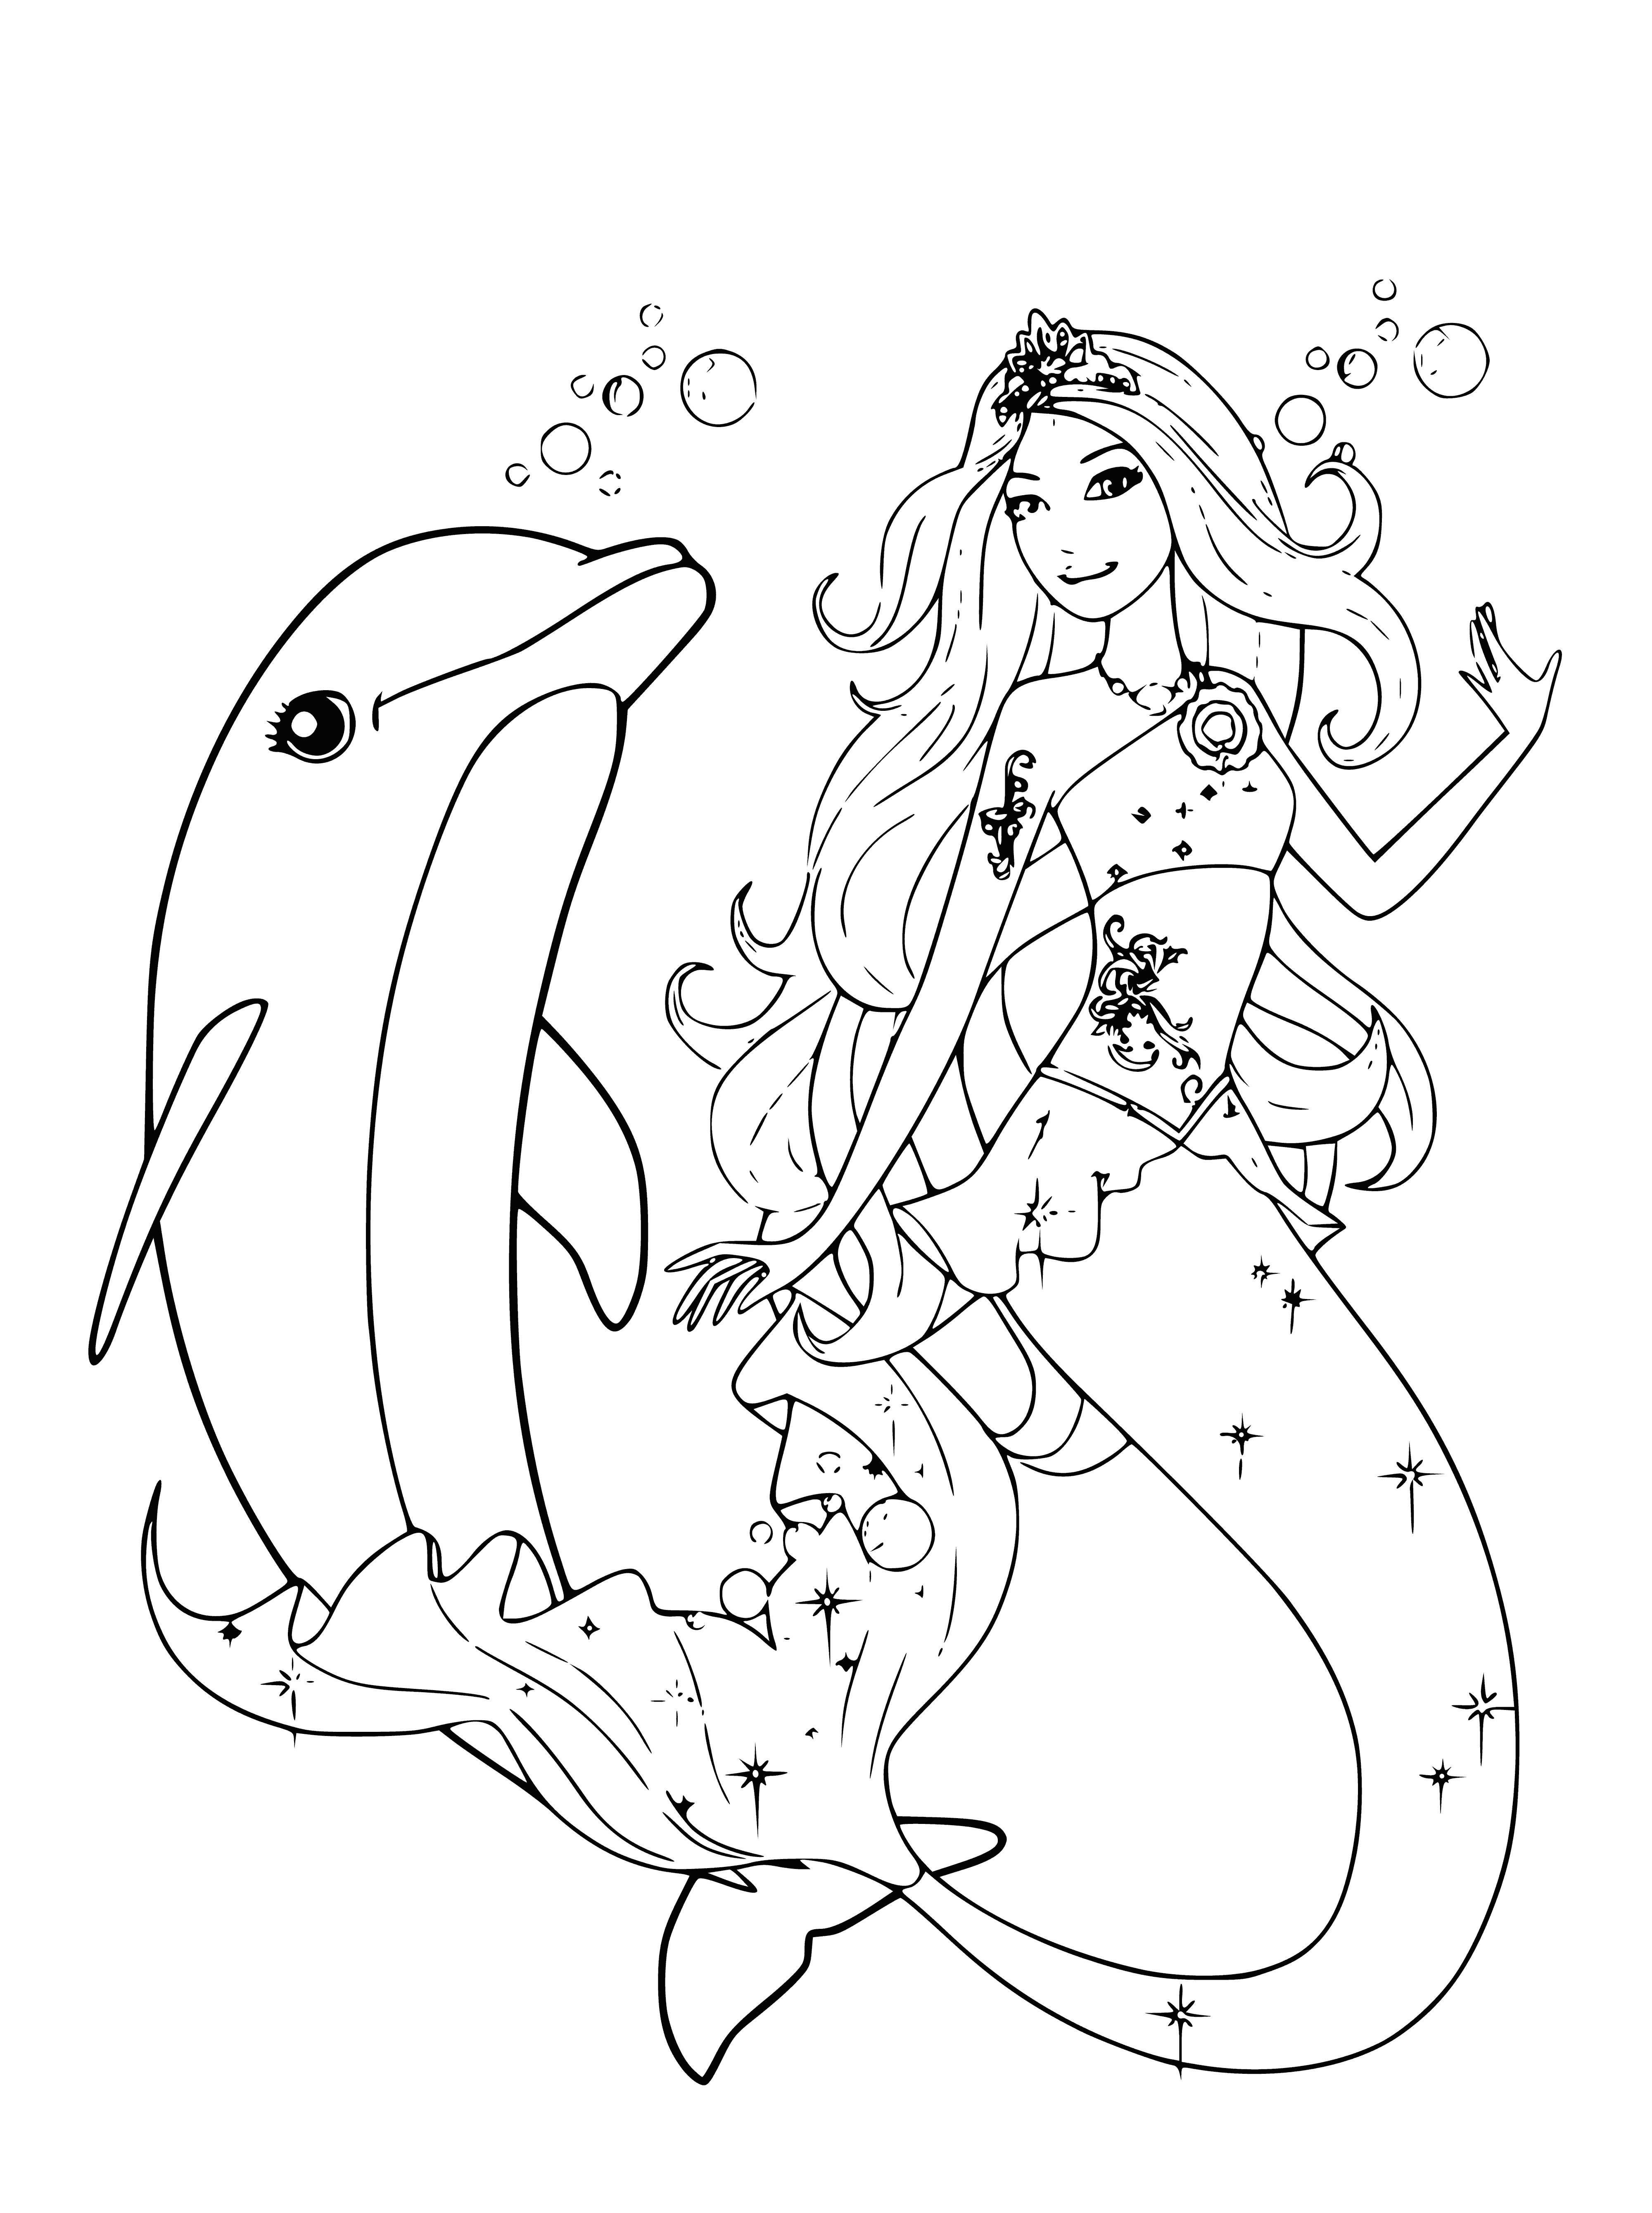 coloring page: Beautiful mermaids and friendly dolphins live in the sea, luring sailors and helping humans.